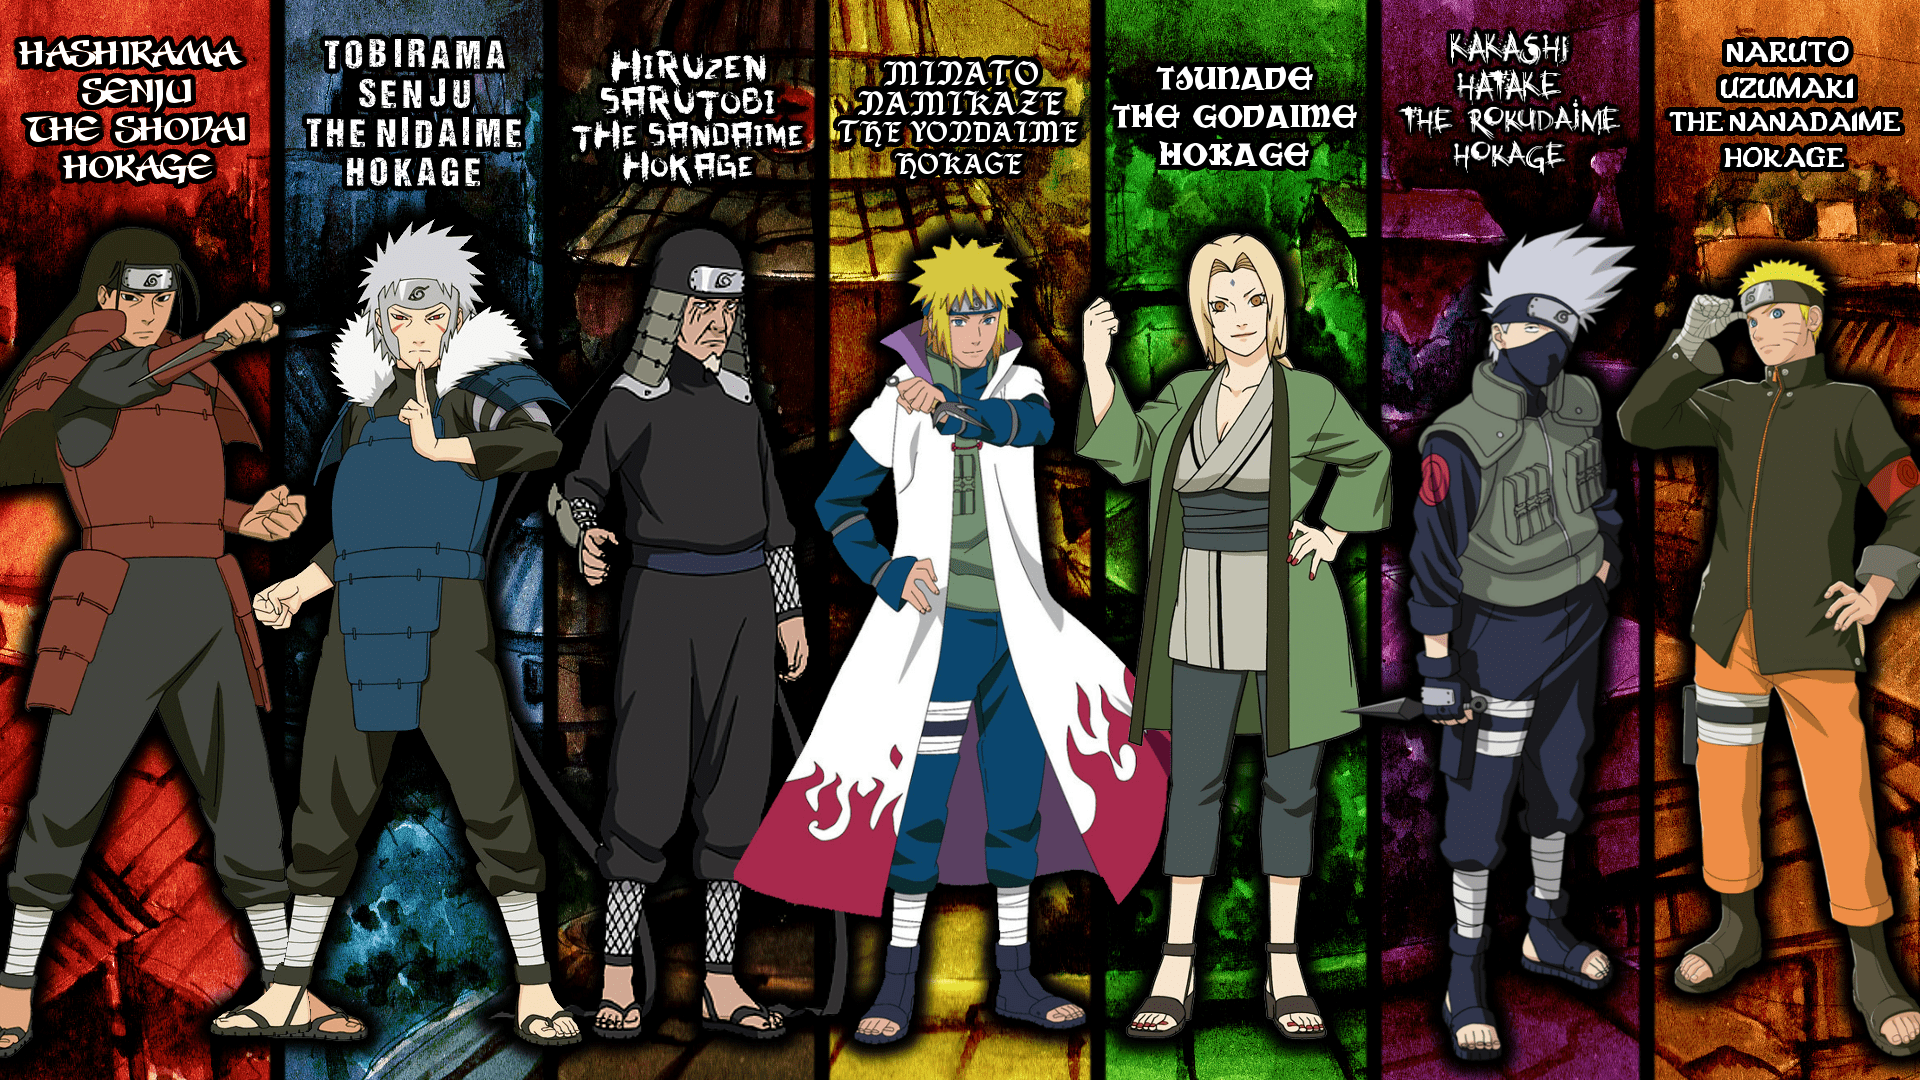 The Hokage Ranking in Naruto (from Worst to Best)